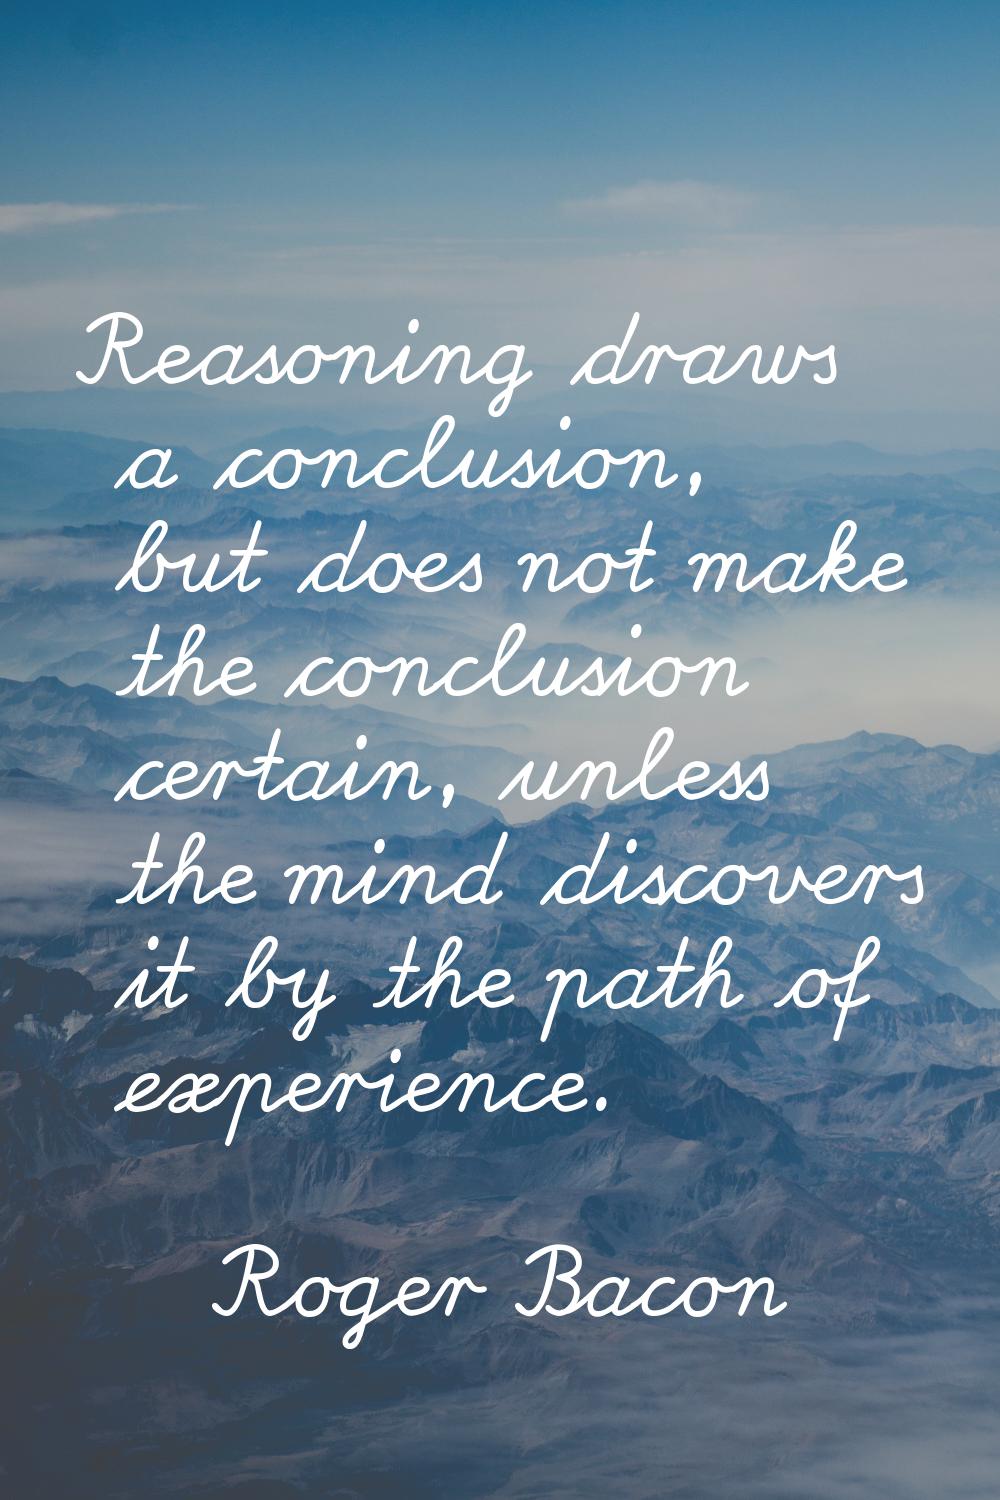 Reasoning draws a conclusion, but does not make the conclusion certain, unless the mind discovers i